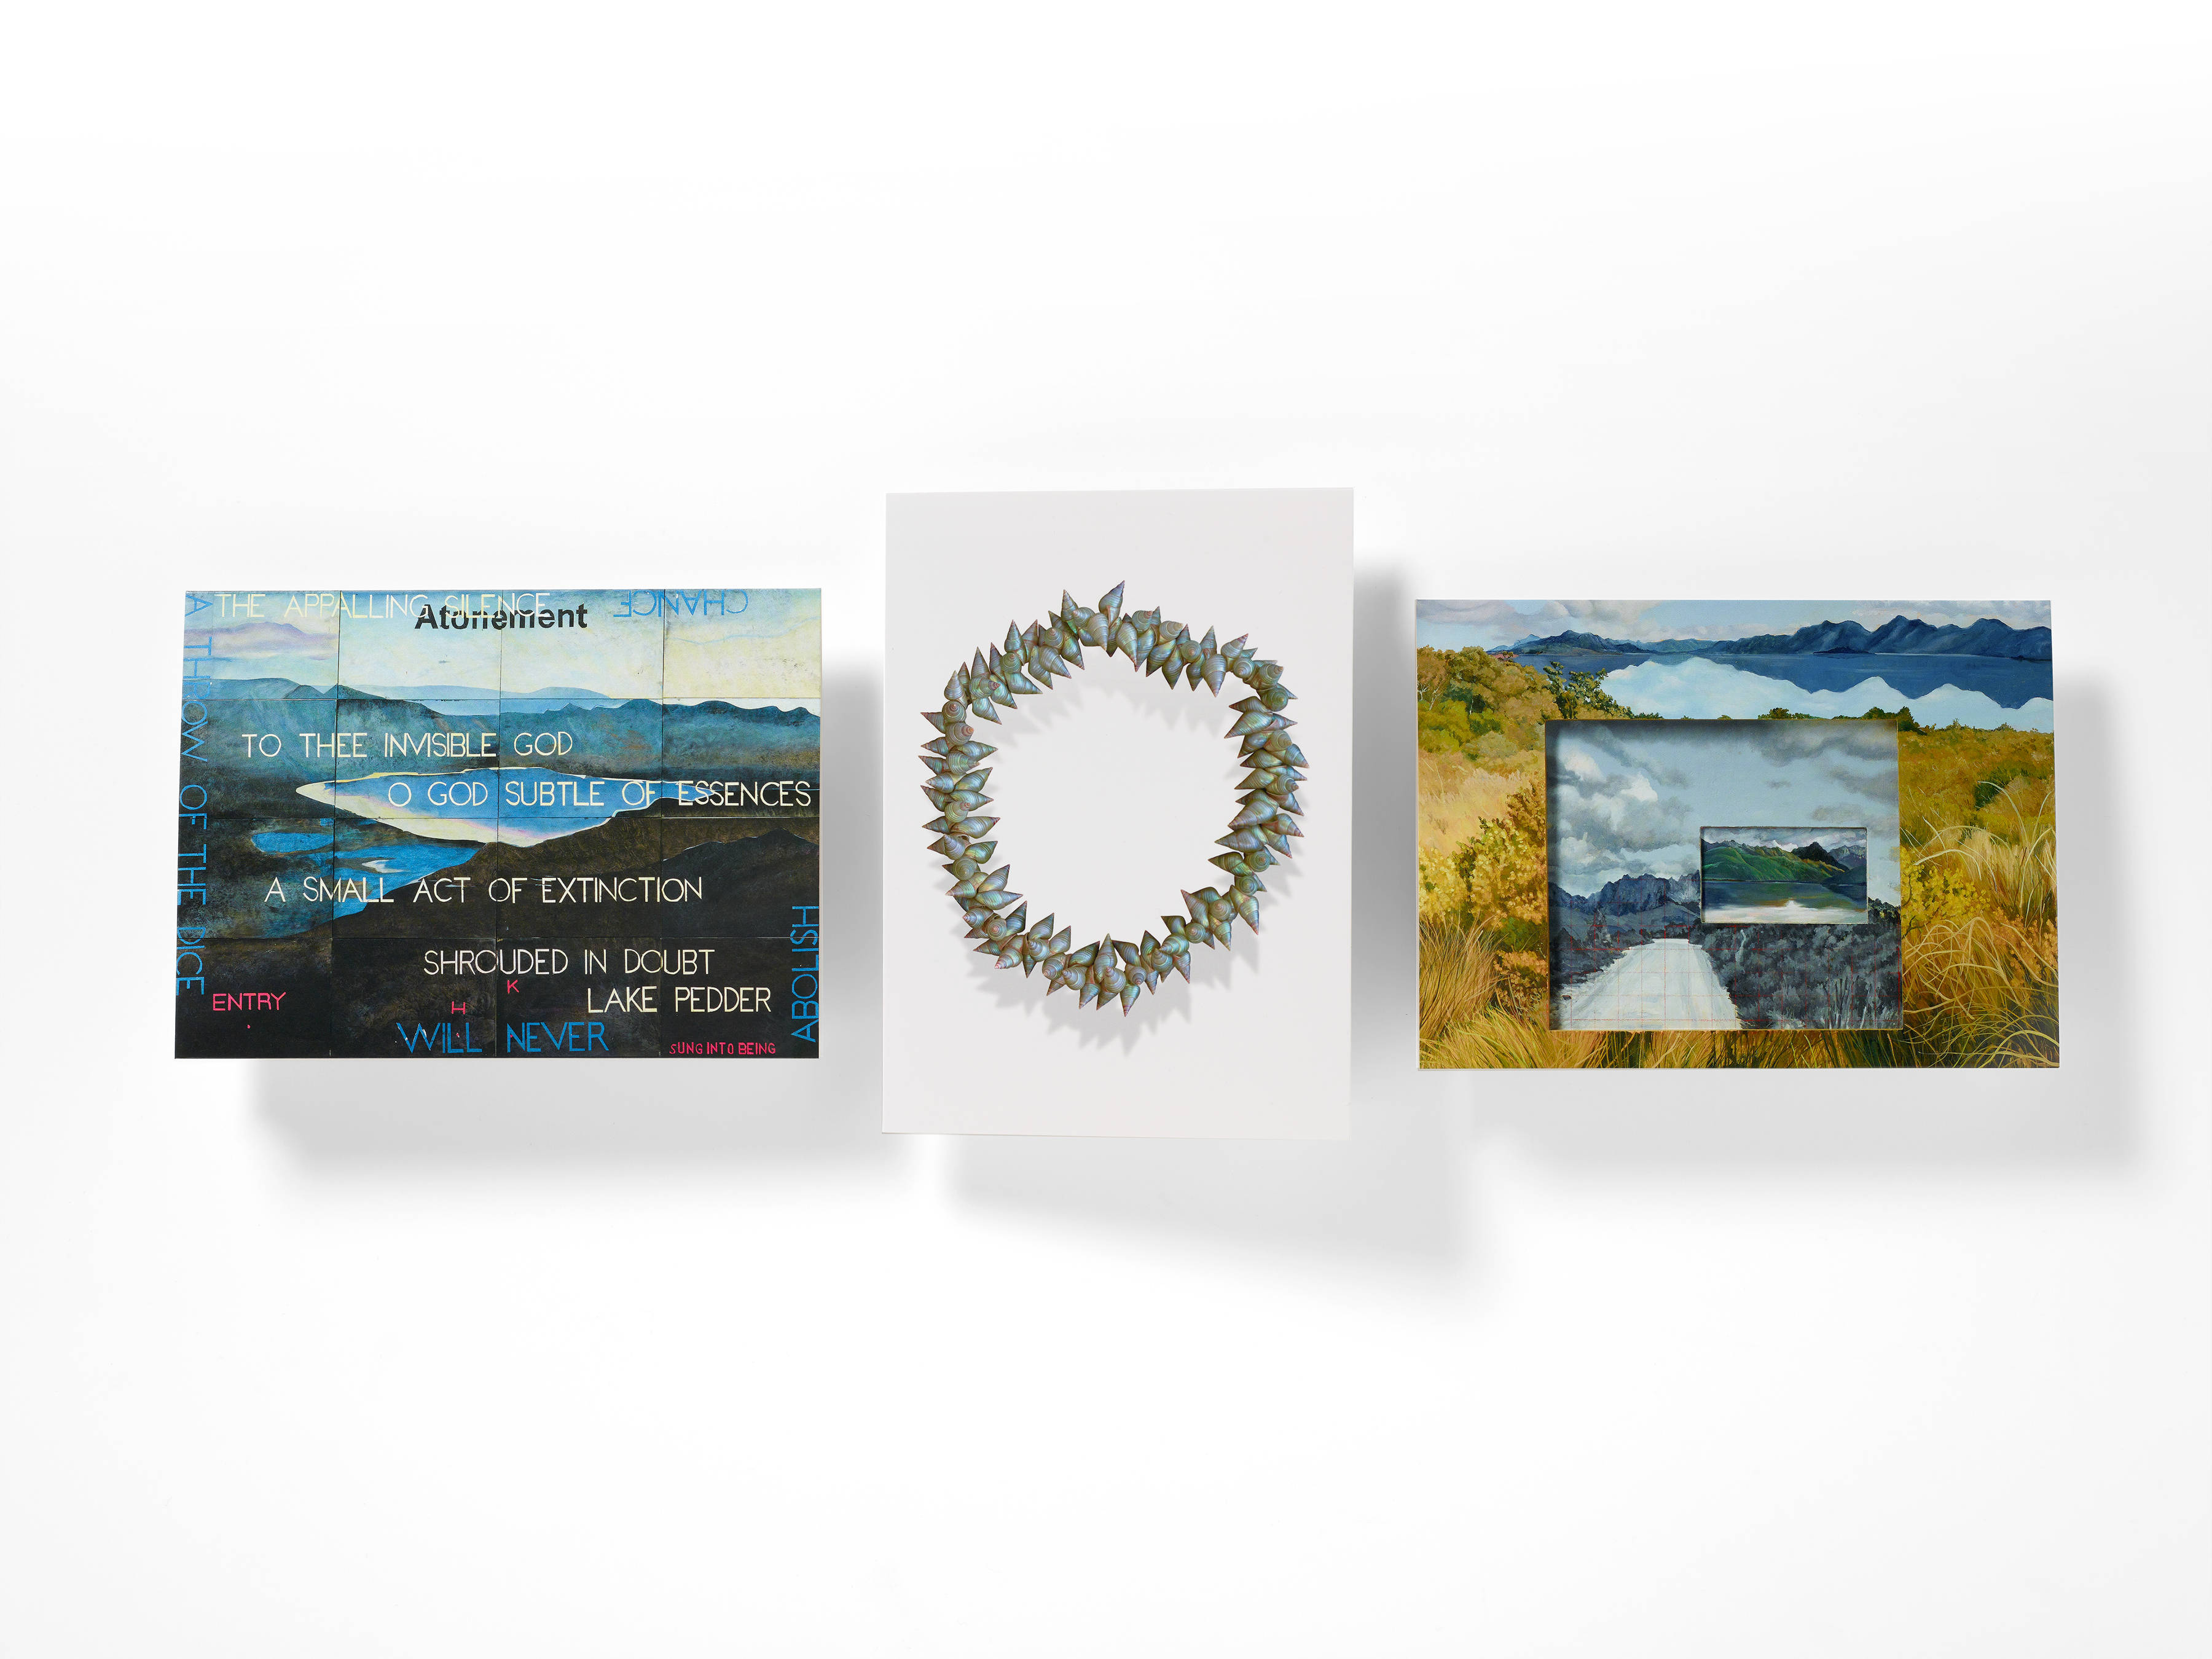 Photograph shows three of the cards from the box set of water[shed] art works. Photo: Peter Whyte.